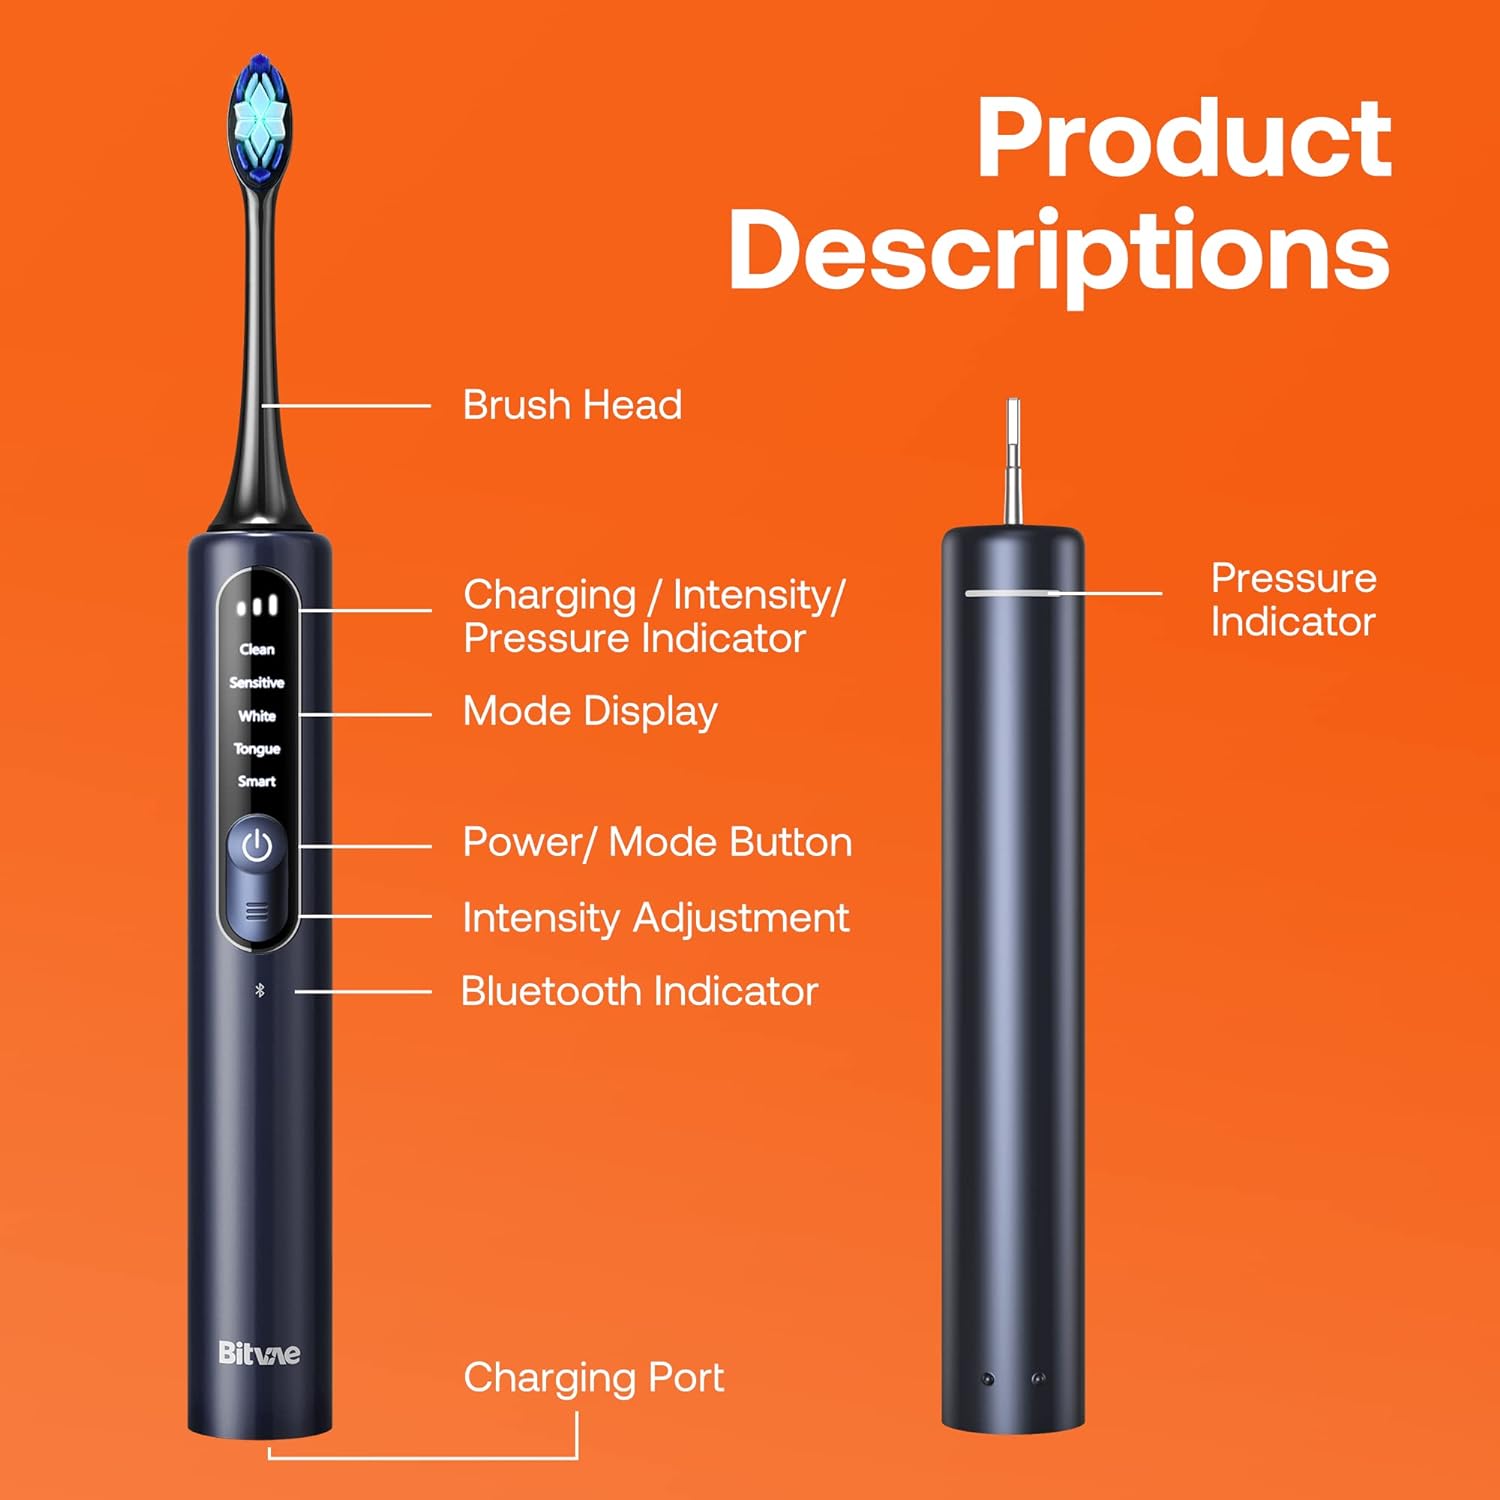 Bitvae Smart S3 Sonic Electric Toothbrush for Adults, 180-Day Battery Life Rechargeable Electric Power Toothbrush with Pressure Sensor, Electric Toothbrush with 4 Brush Heads, Travel Case, Dark Blue